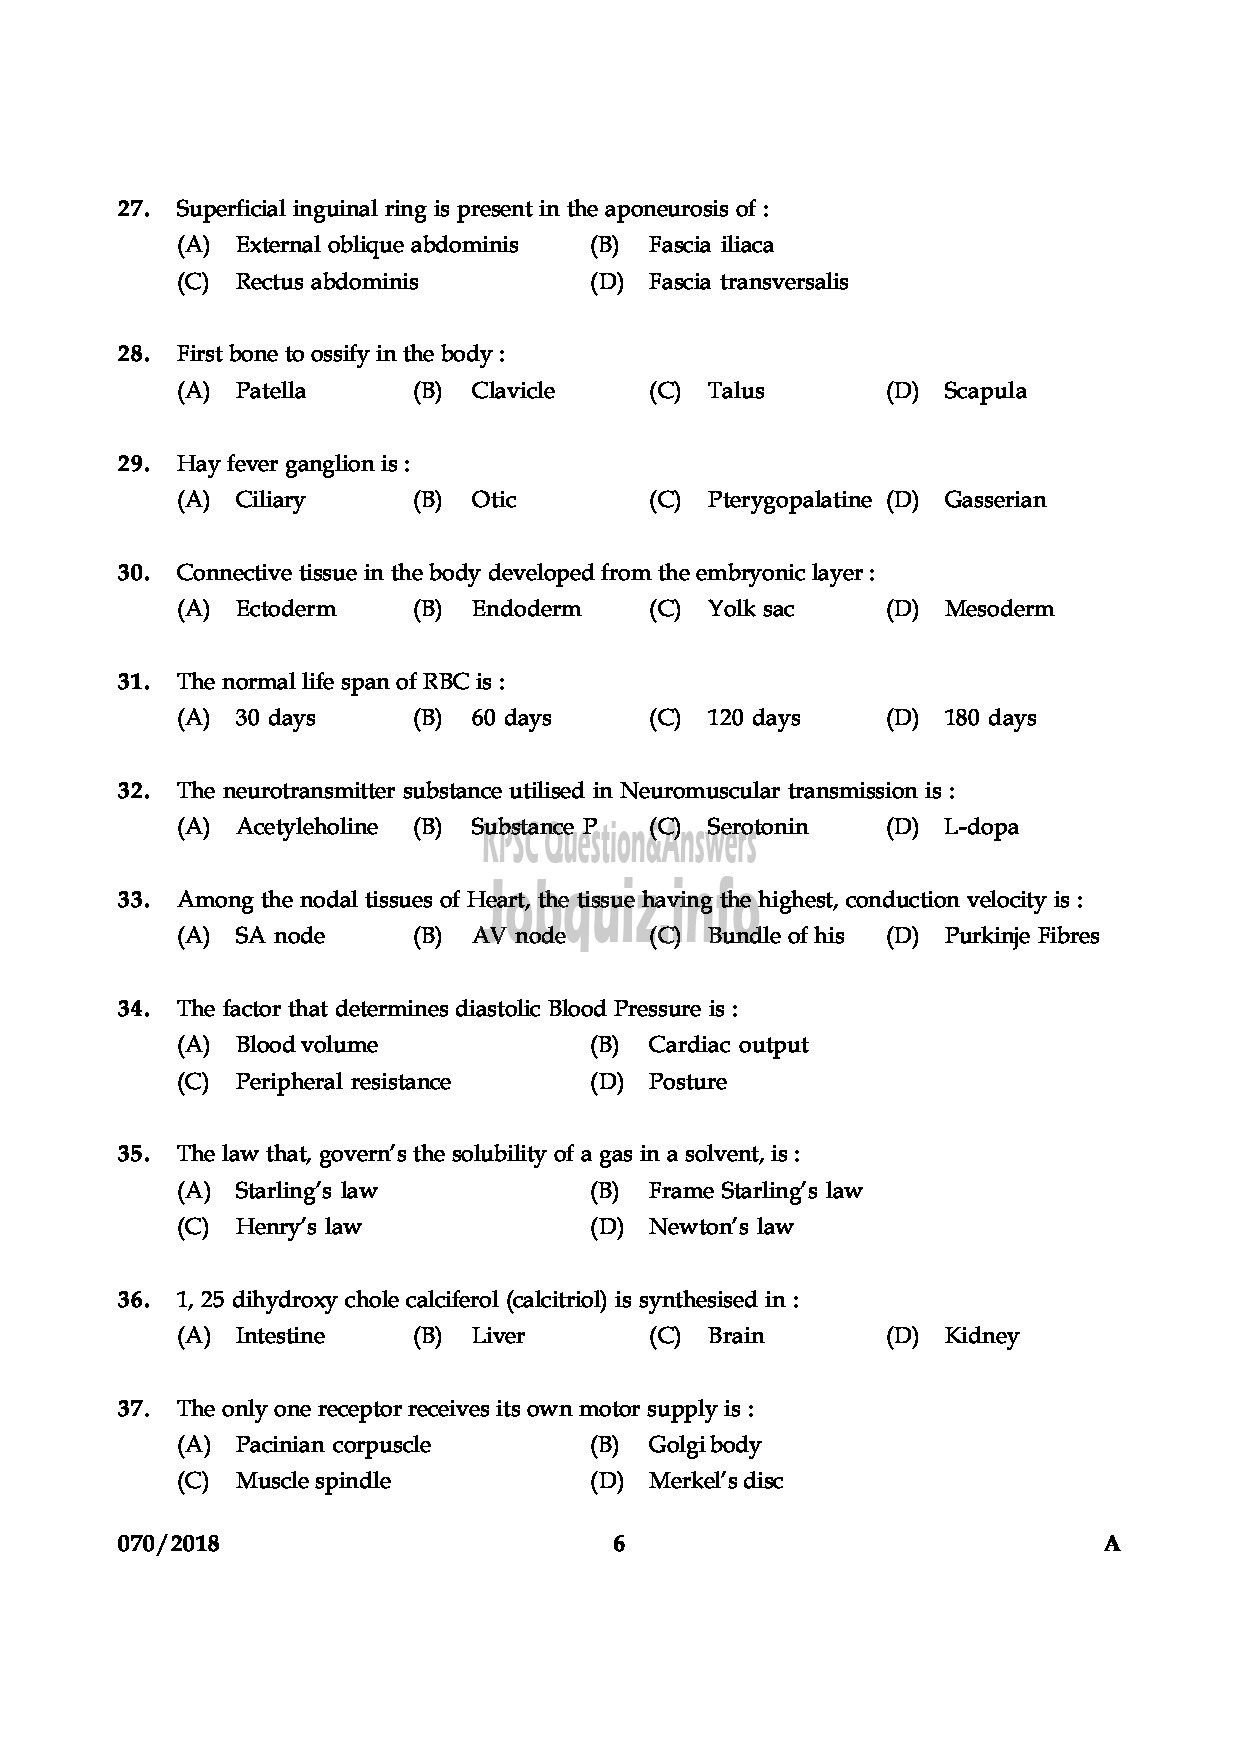 Kerala PSC Question Paper - MEDICAL OFFICER HOMOEO/ ASSISTANT INSURANCE MEDICAL OFFICER HOMOEO HOMOEOPATHY/ INSURANCE MEDICAL SERVICES-6